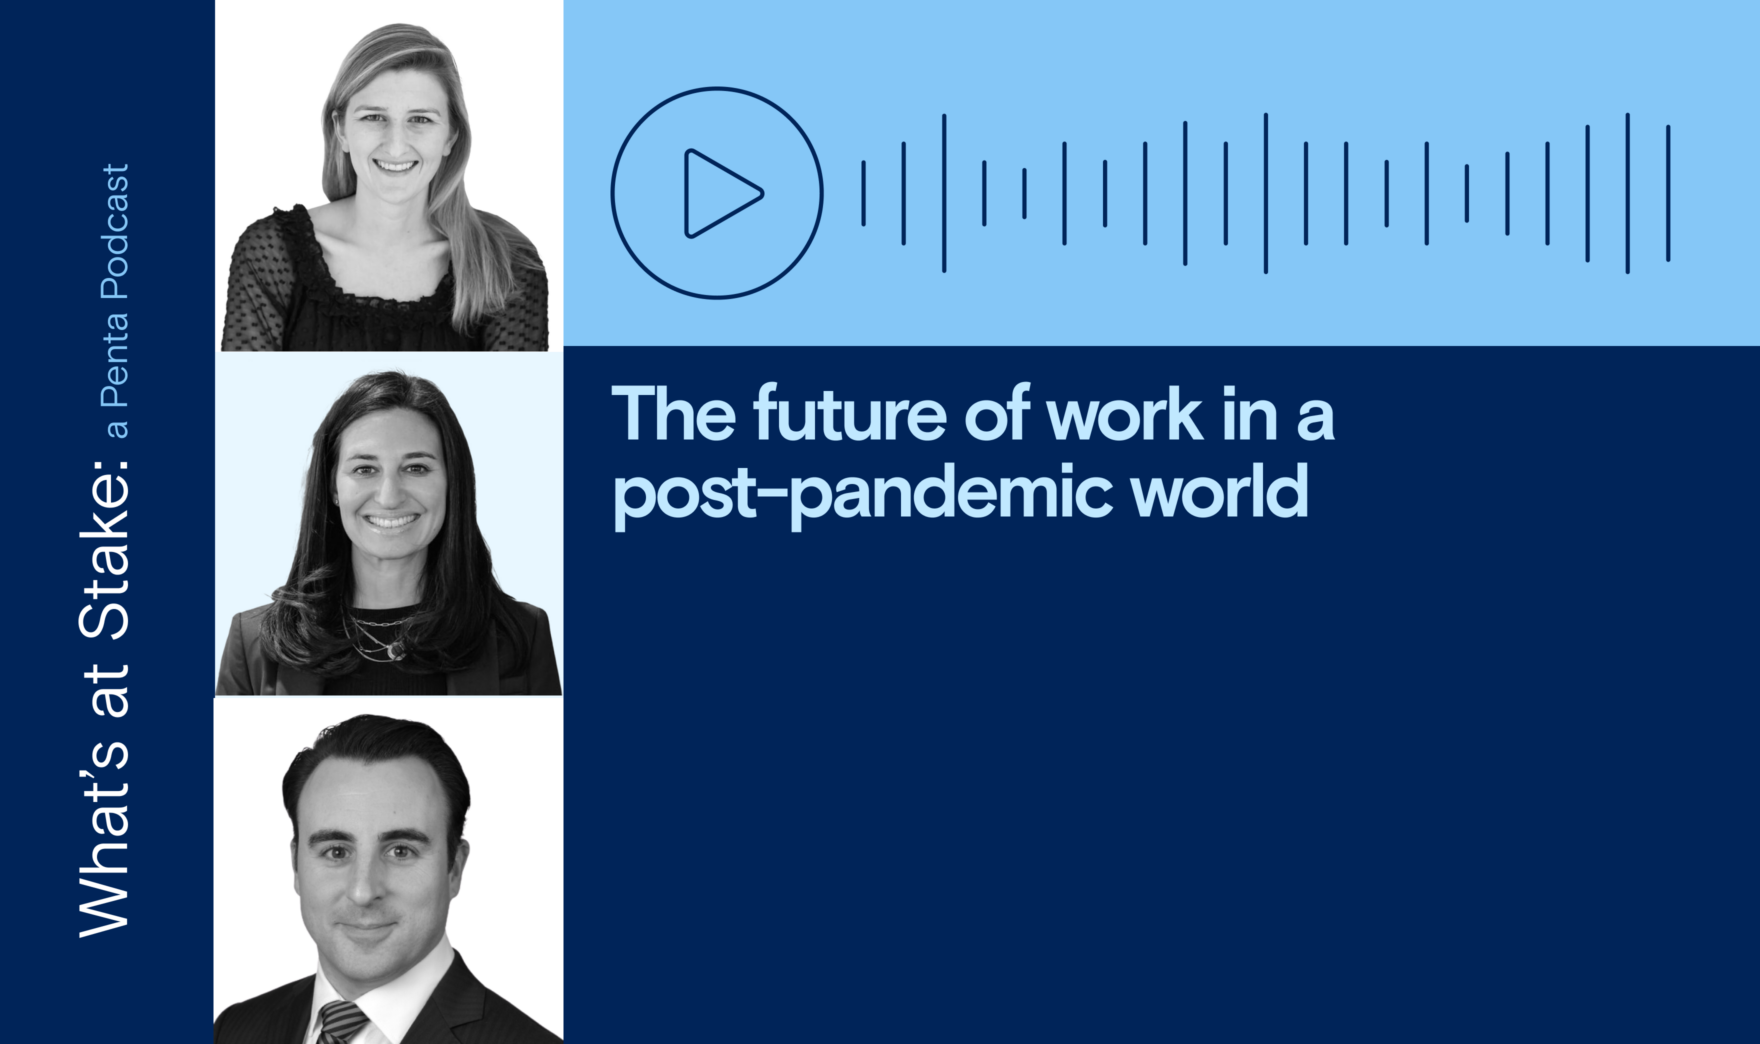 The future of work in a post-pandemic world